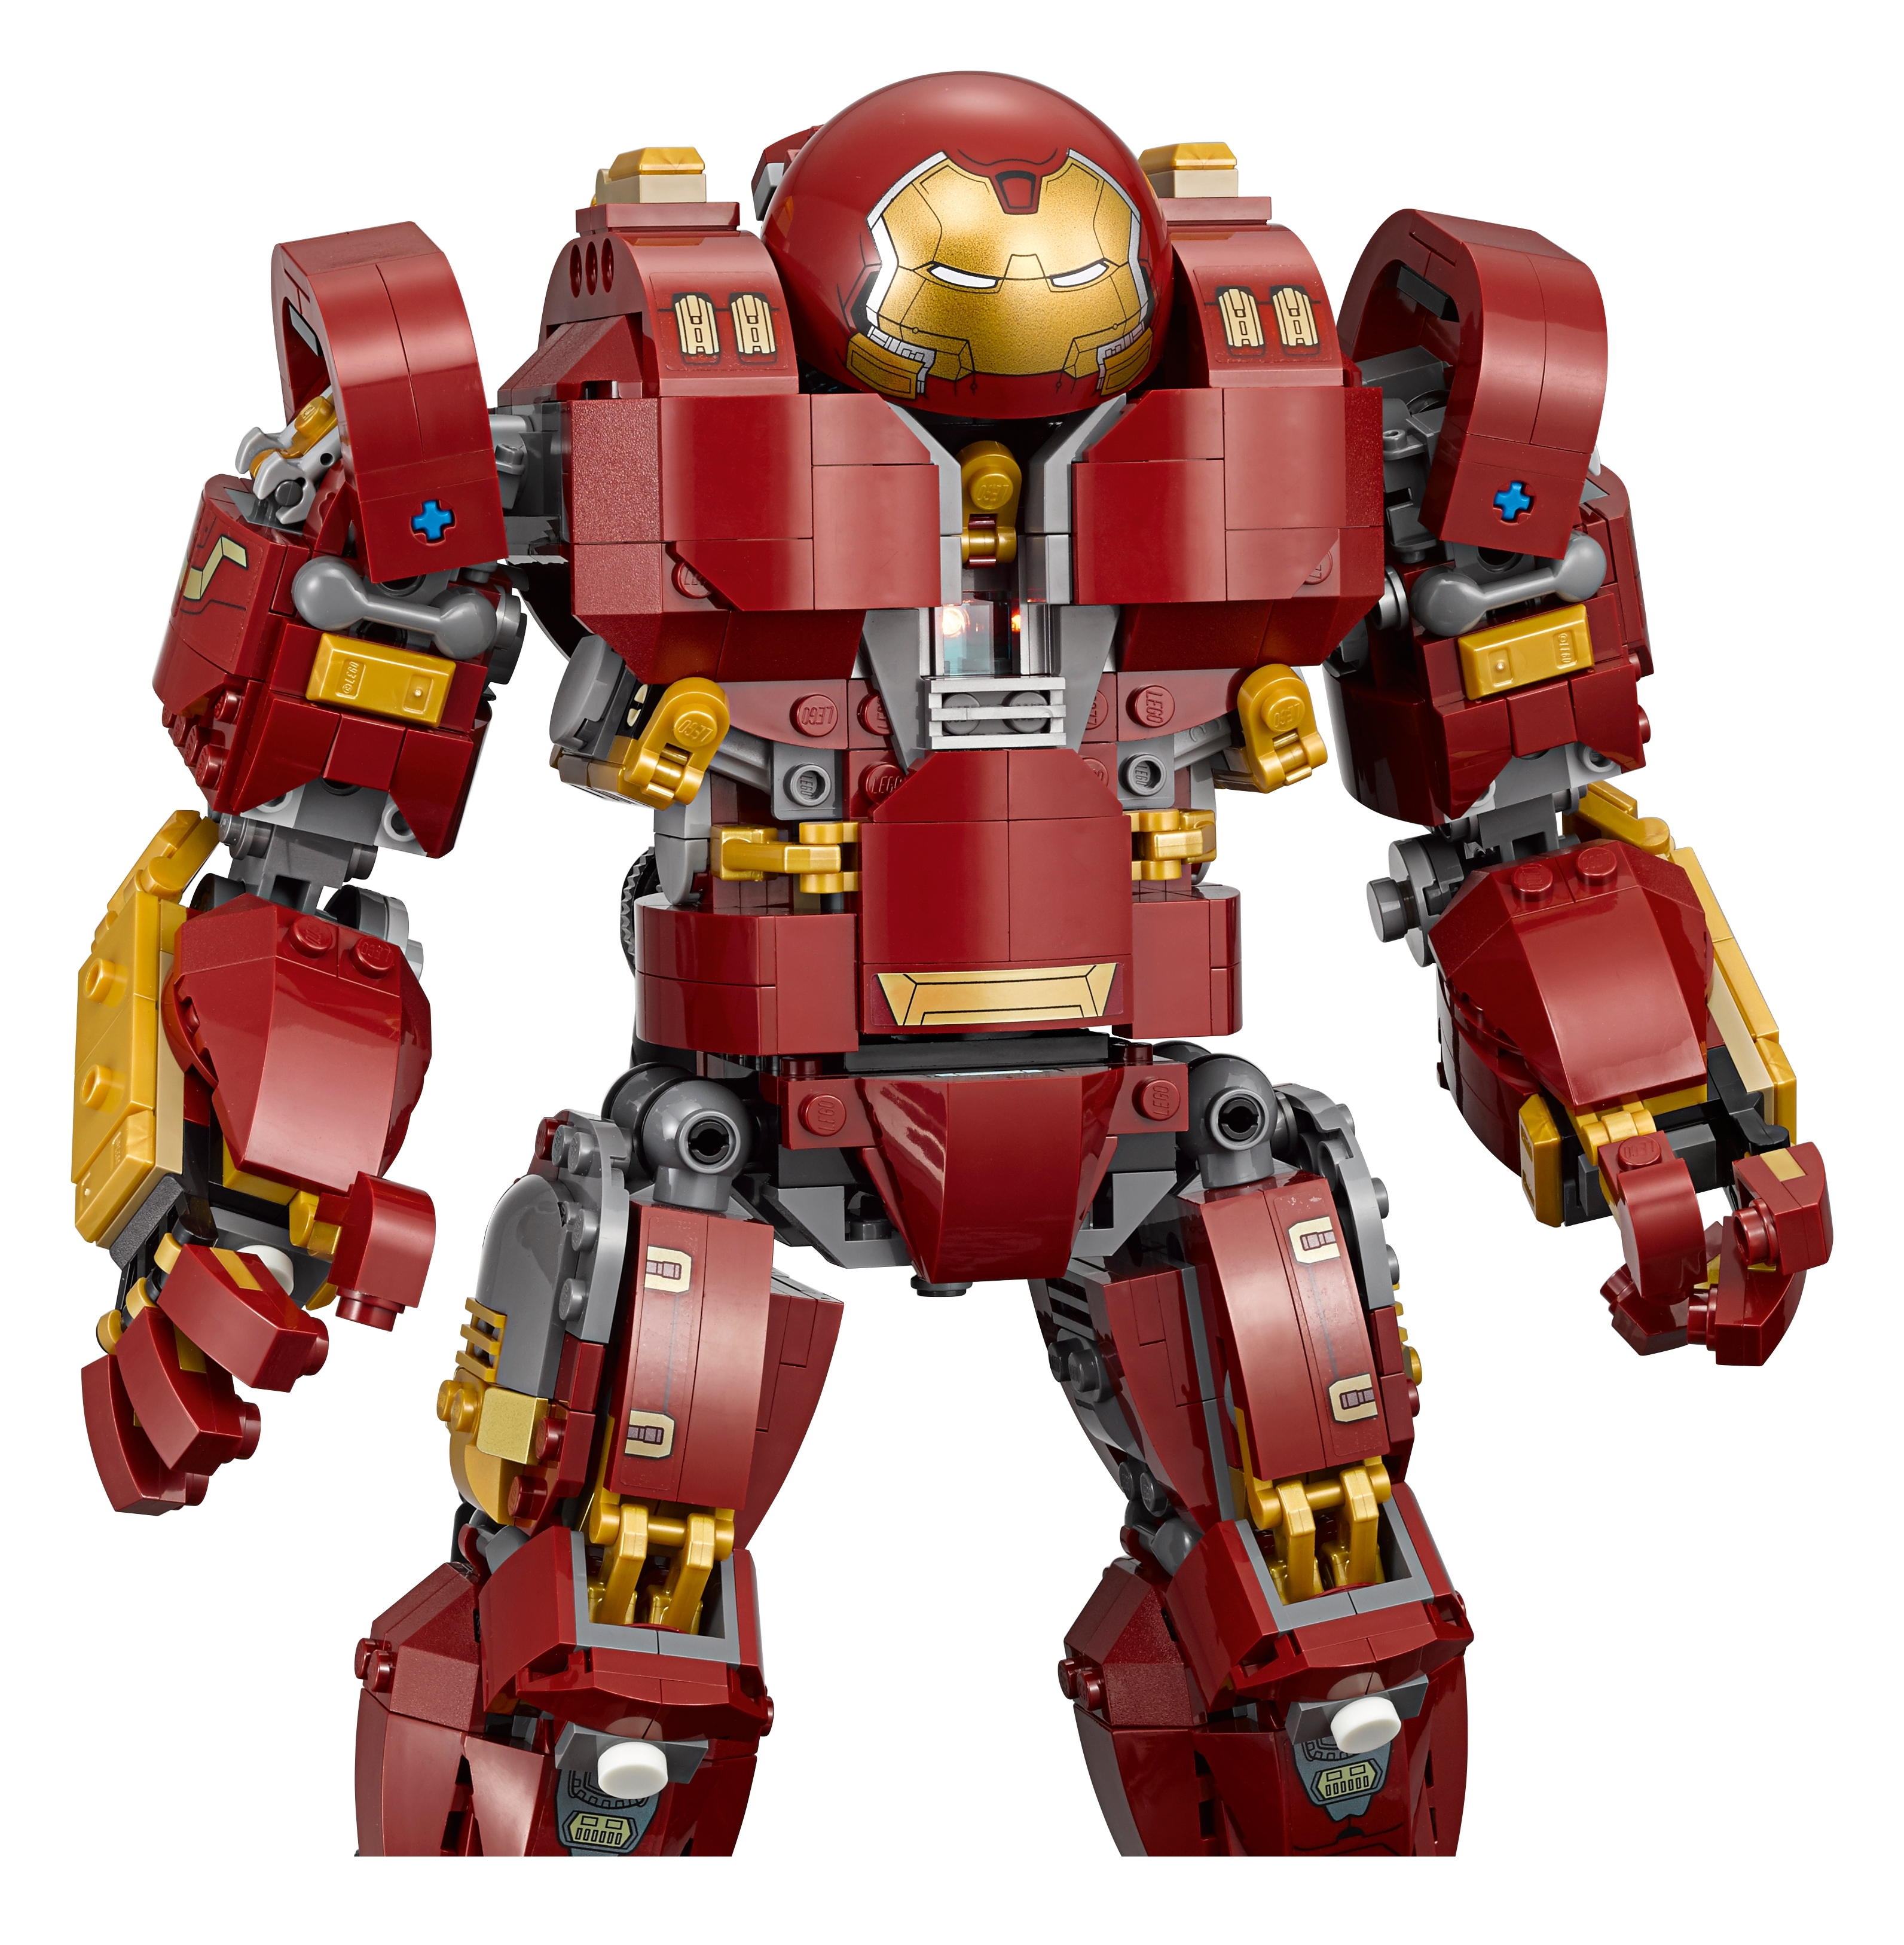 The Hulkbuster: Edition 76105 Marvel | Buy online at the Official Shop US